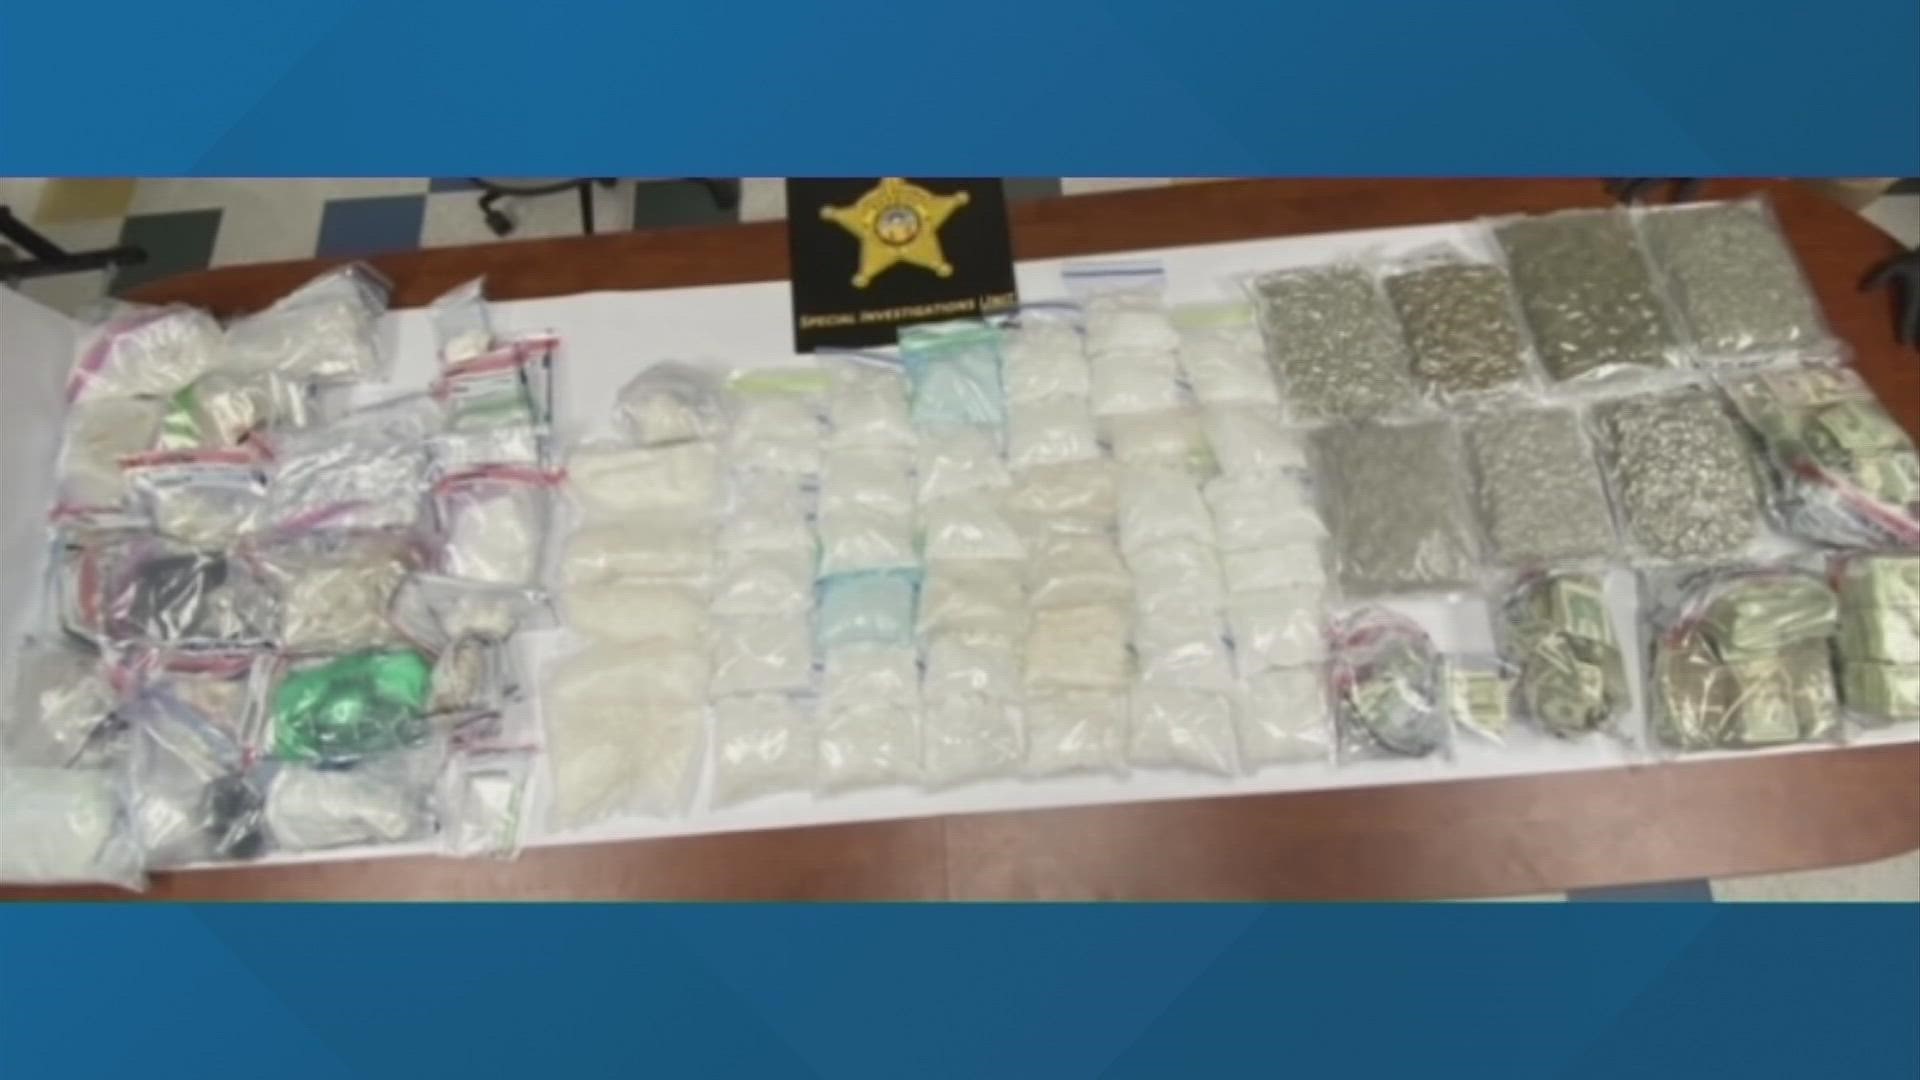 In April 2020, the force did not seize any cocaine. The next year they were able to get 87 grams and this year, they have seized 872 grams.